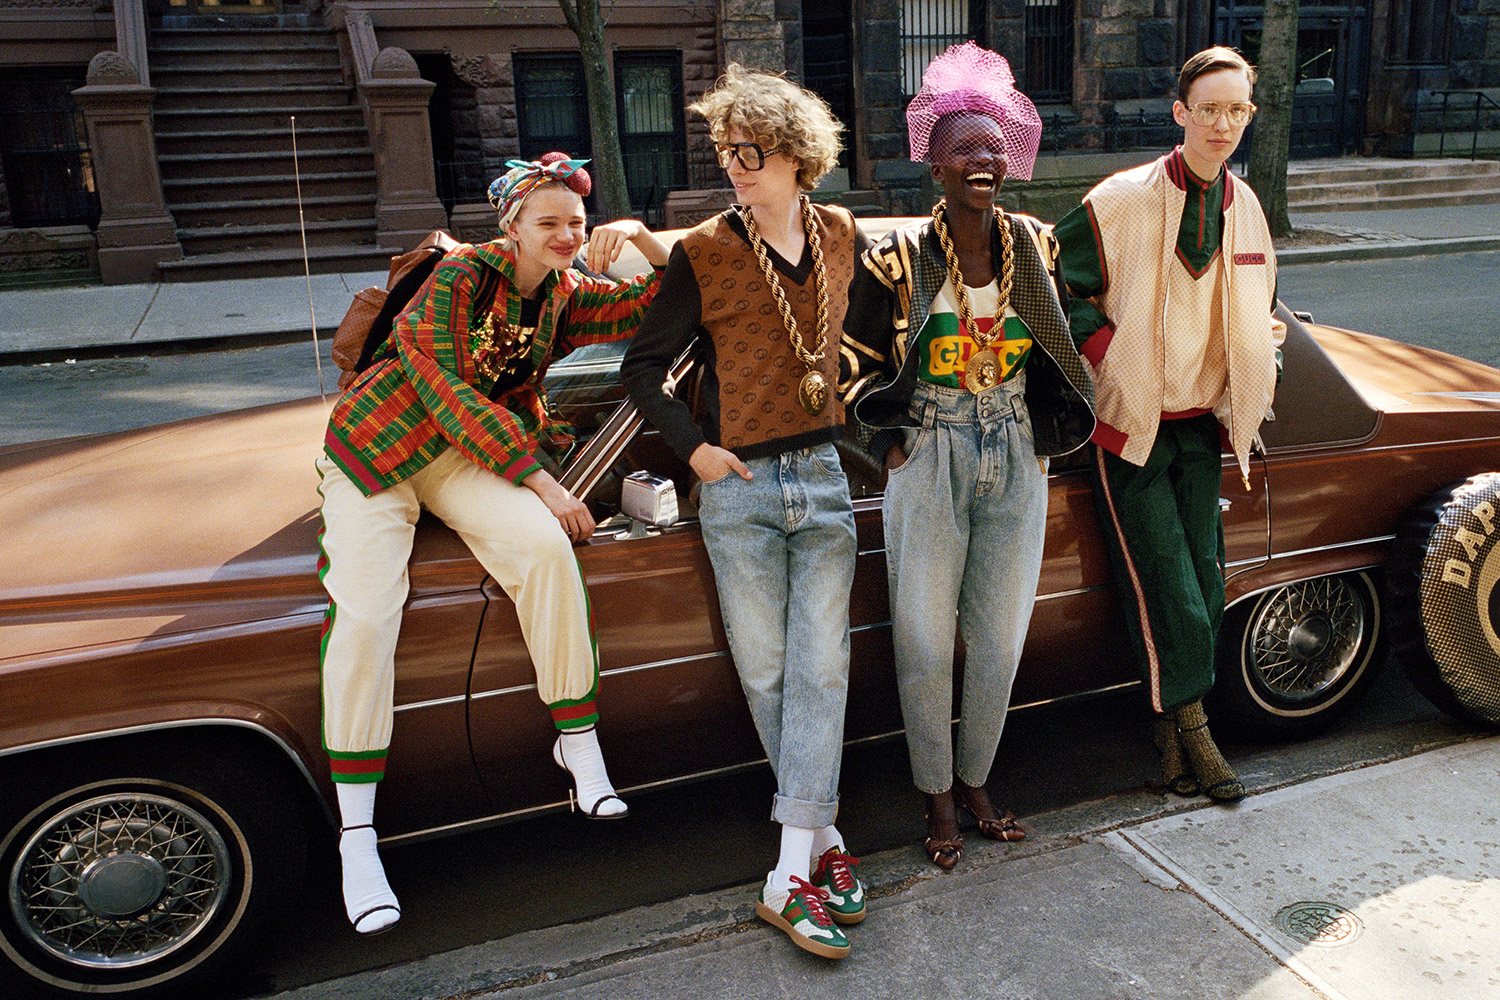 dapper dan and gucci just dropped their latest collection